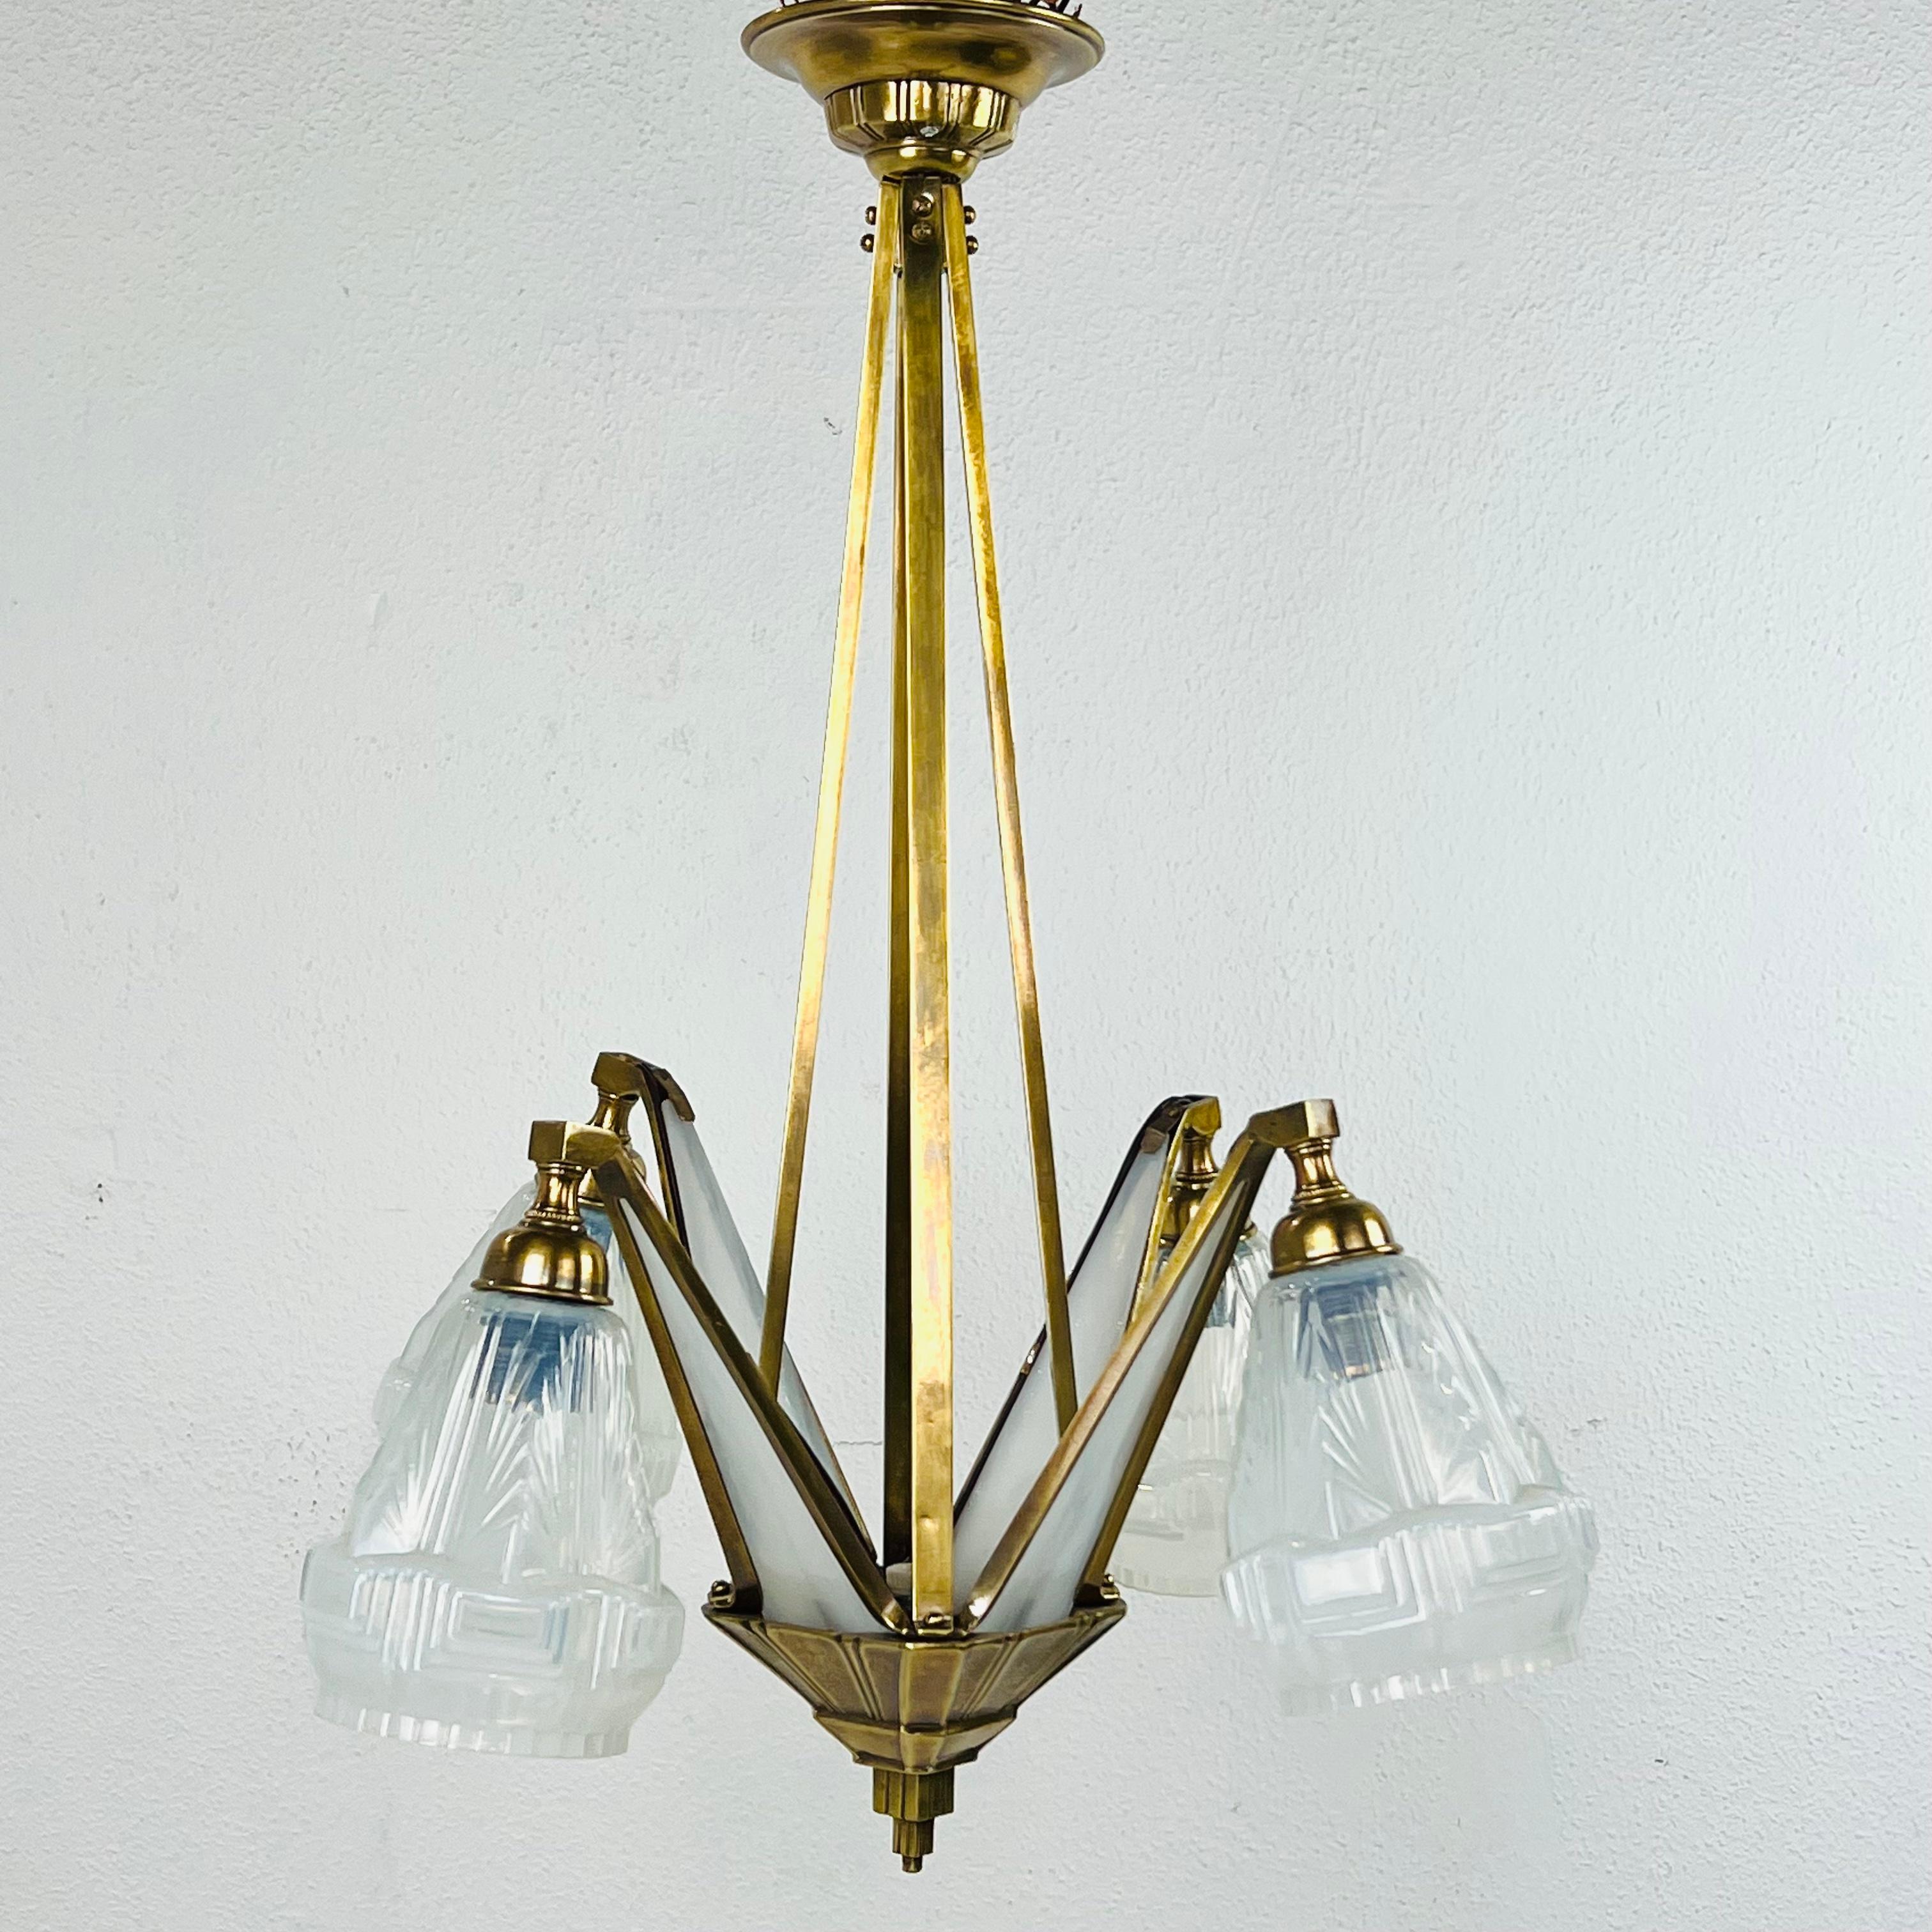 Mid-20th Century French Art Deco Milk Glass Chandelier For Sale